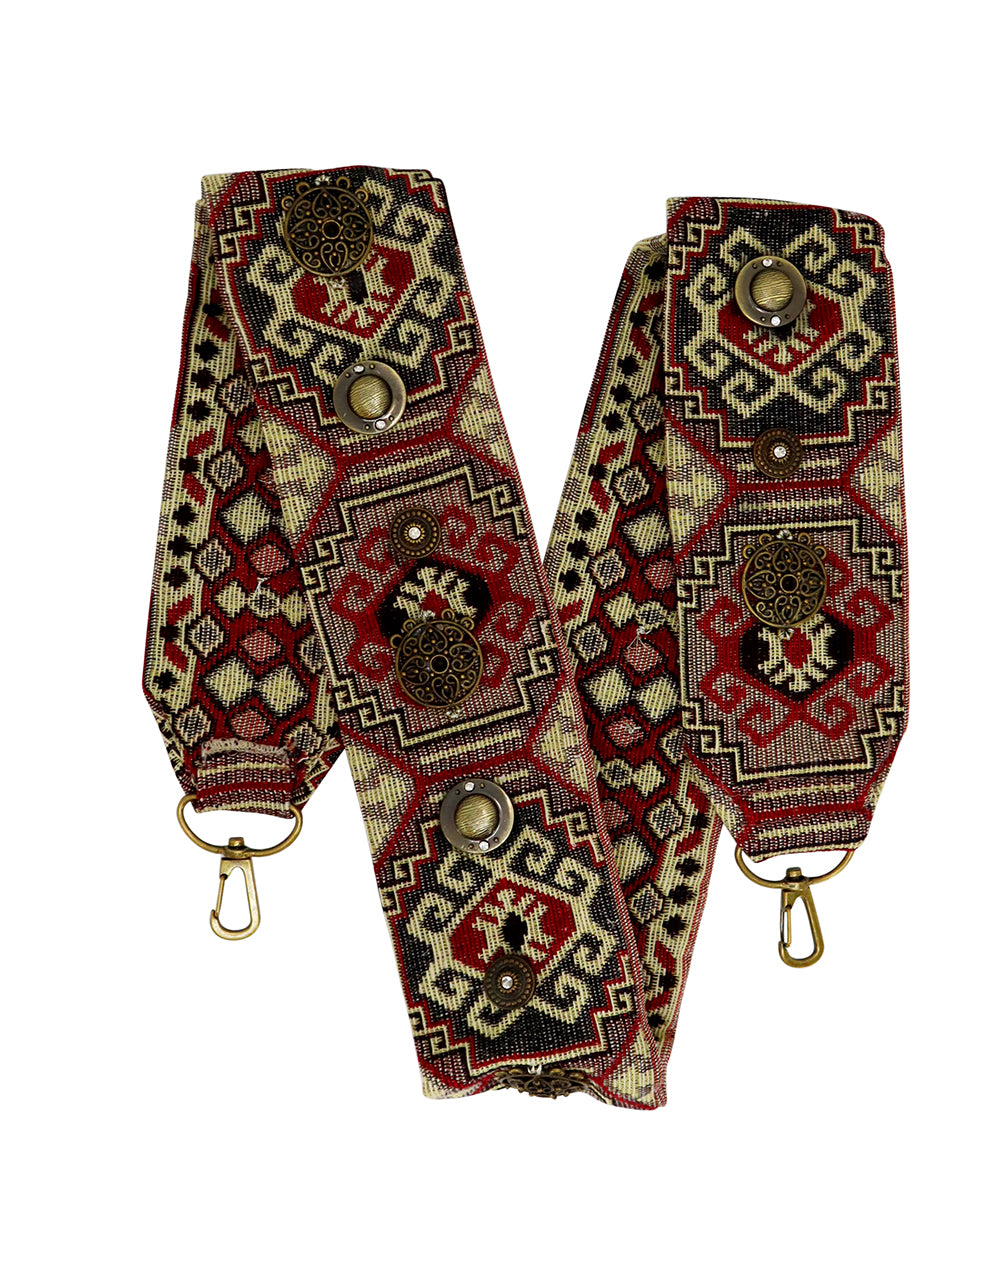 Bag Strap with Ethnic Pattern and Metallic Studs